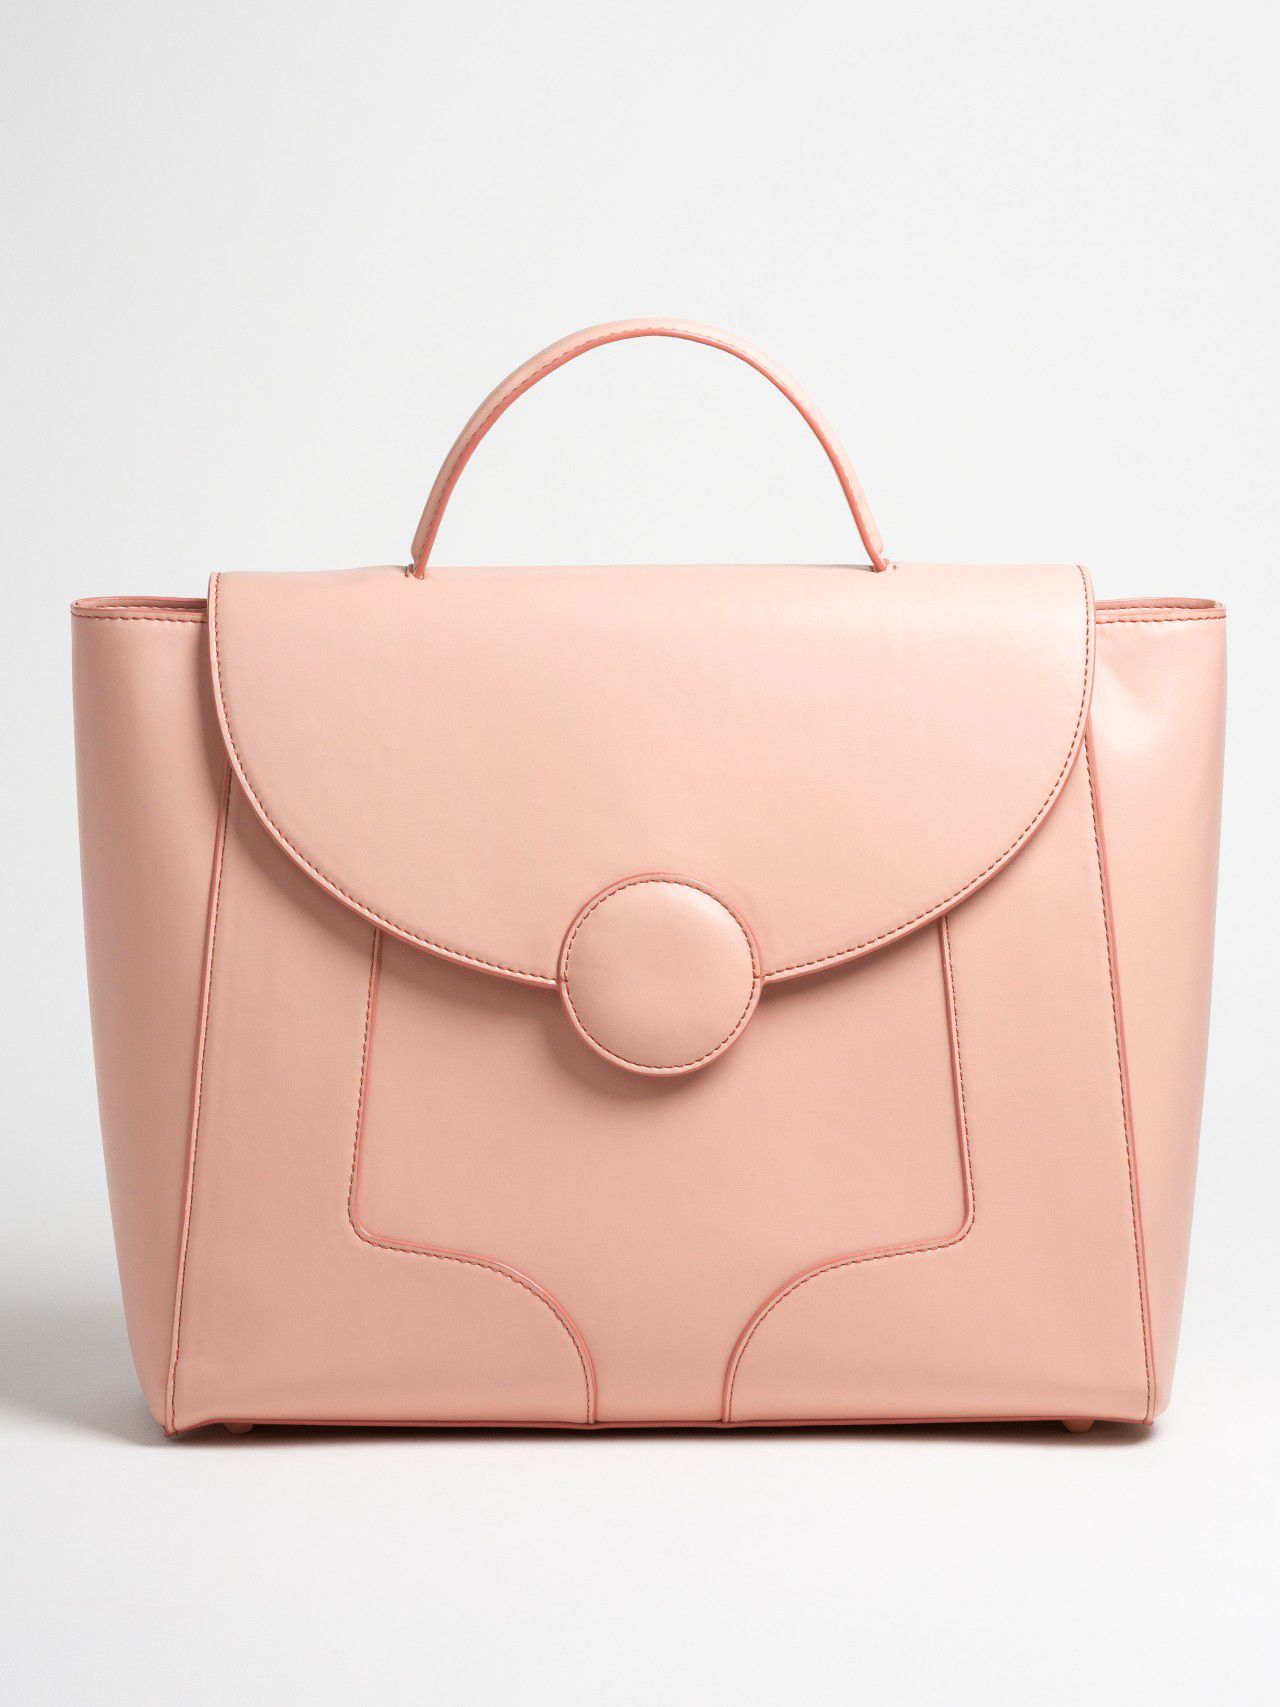 The Jaclyn Bag in Blush Pink, Convertible Backpack/Purse